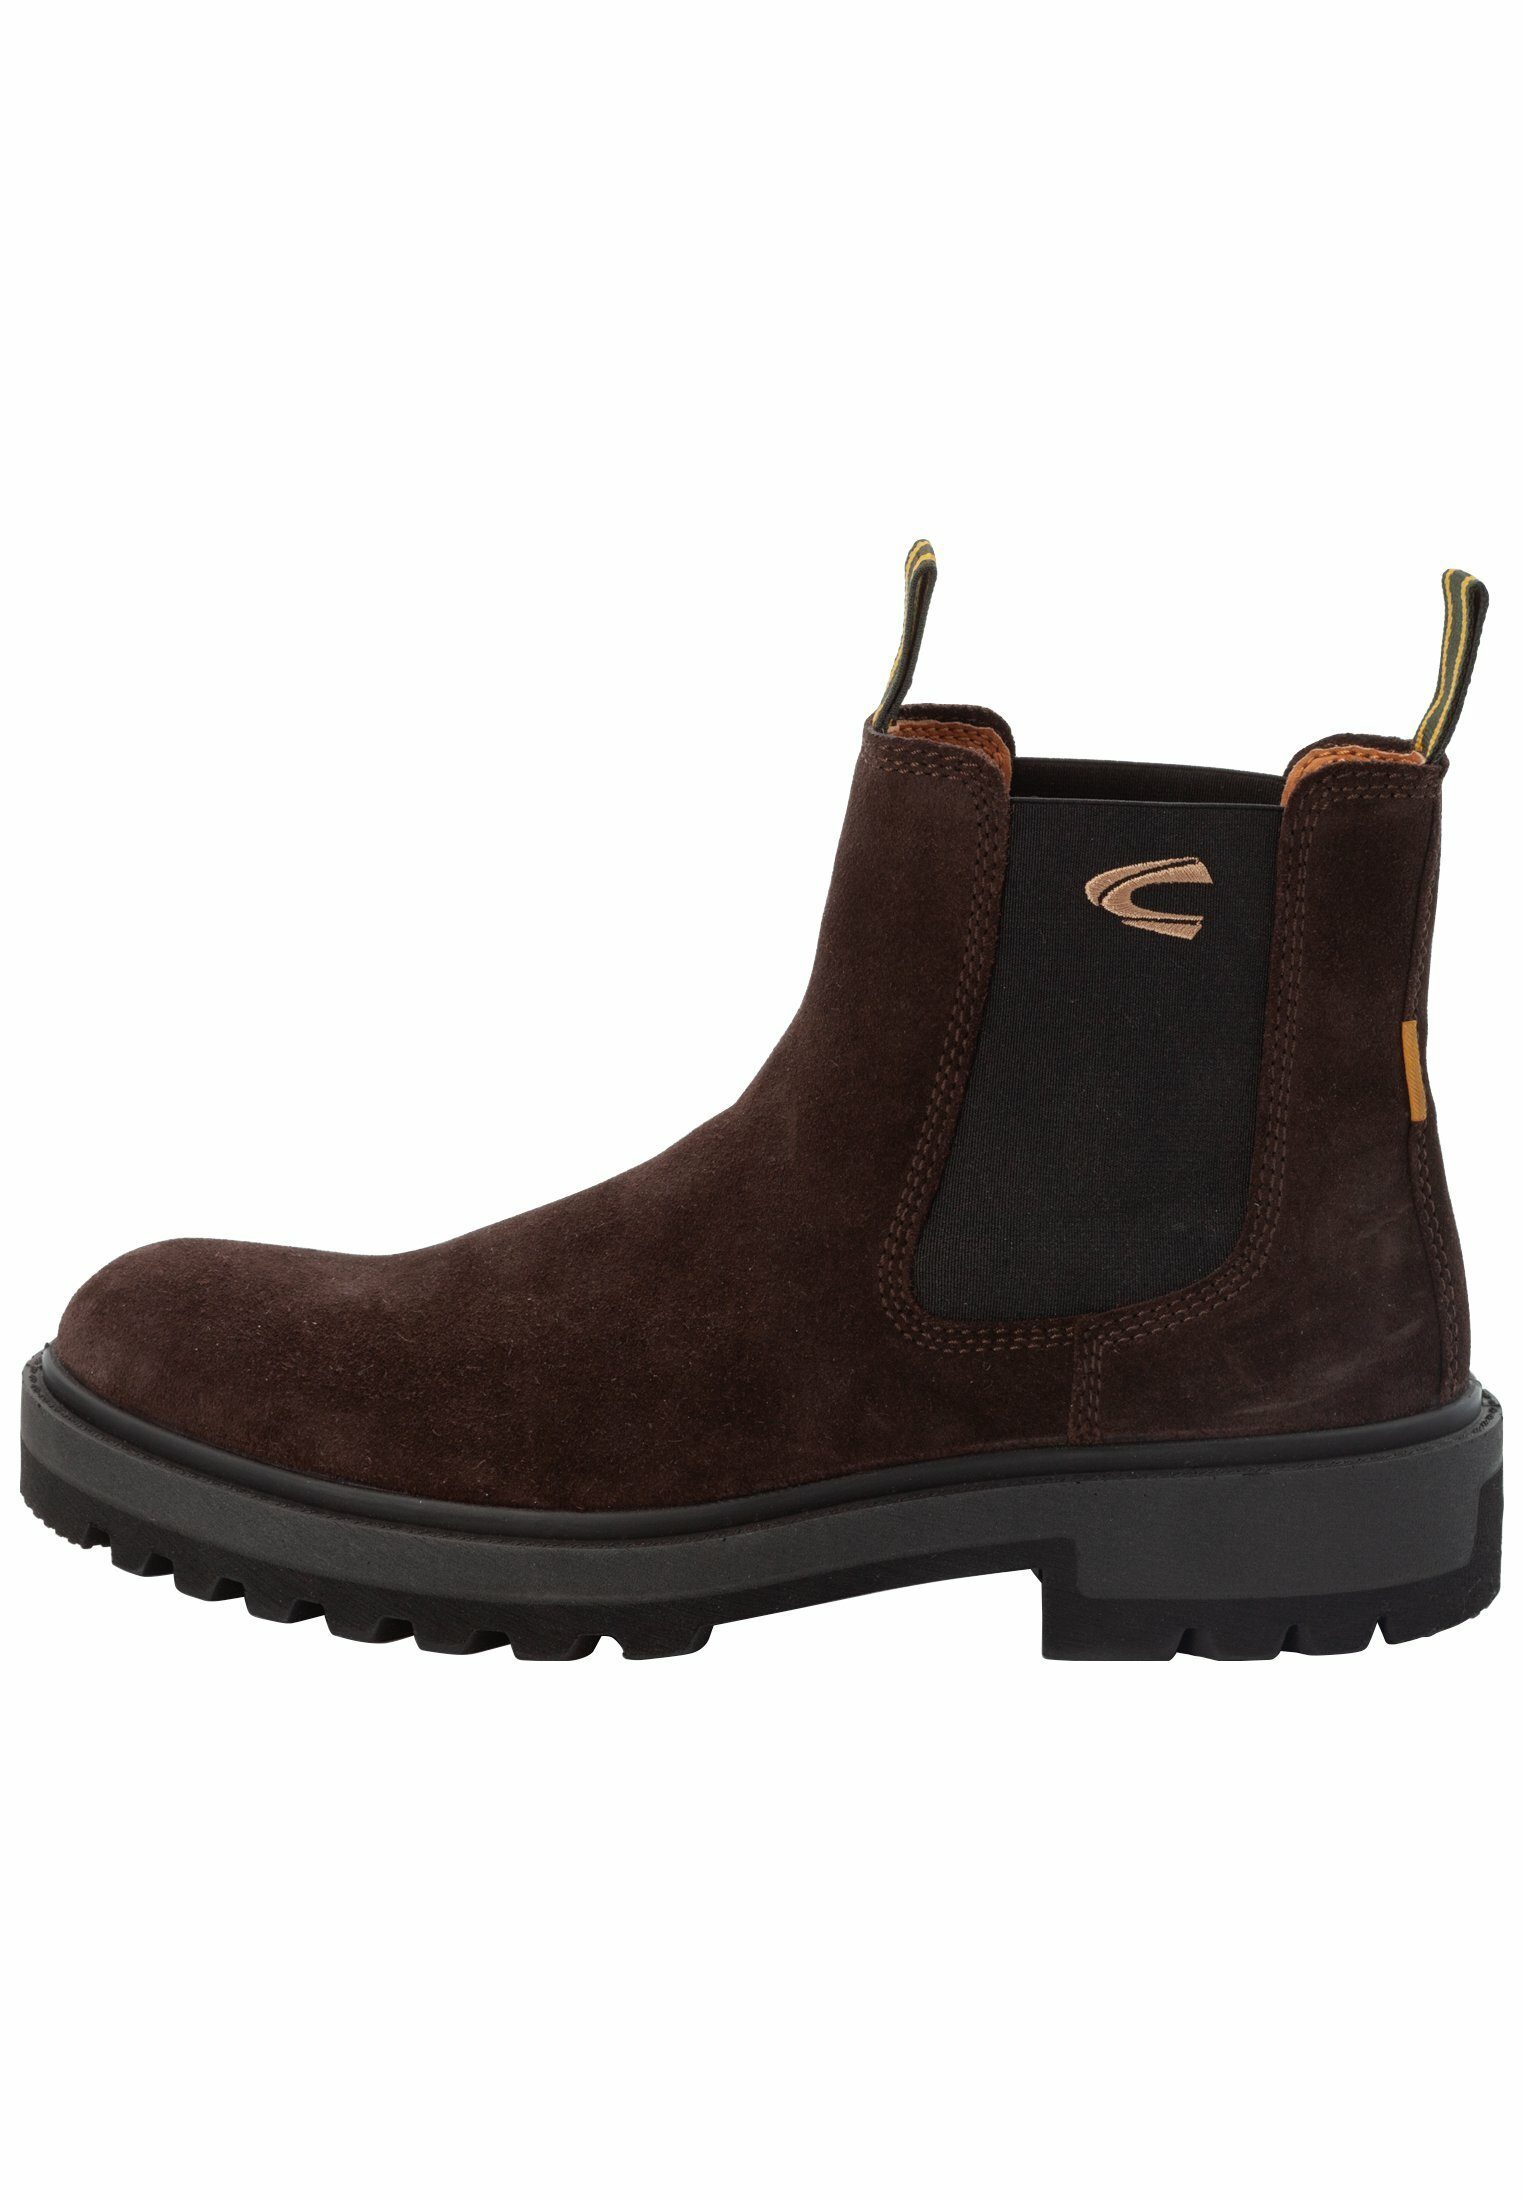 leicht ist besonders active Stiefelette, Forest camel TPU-Sohle